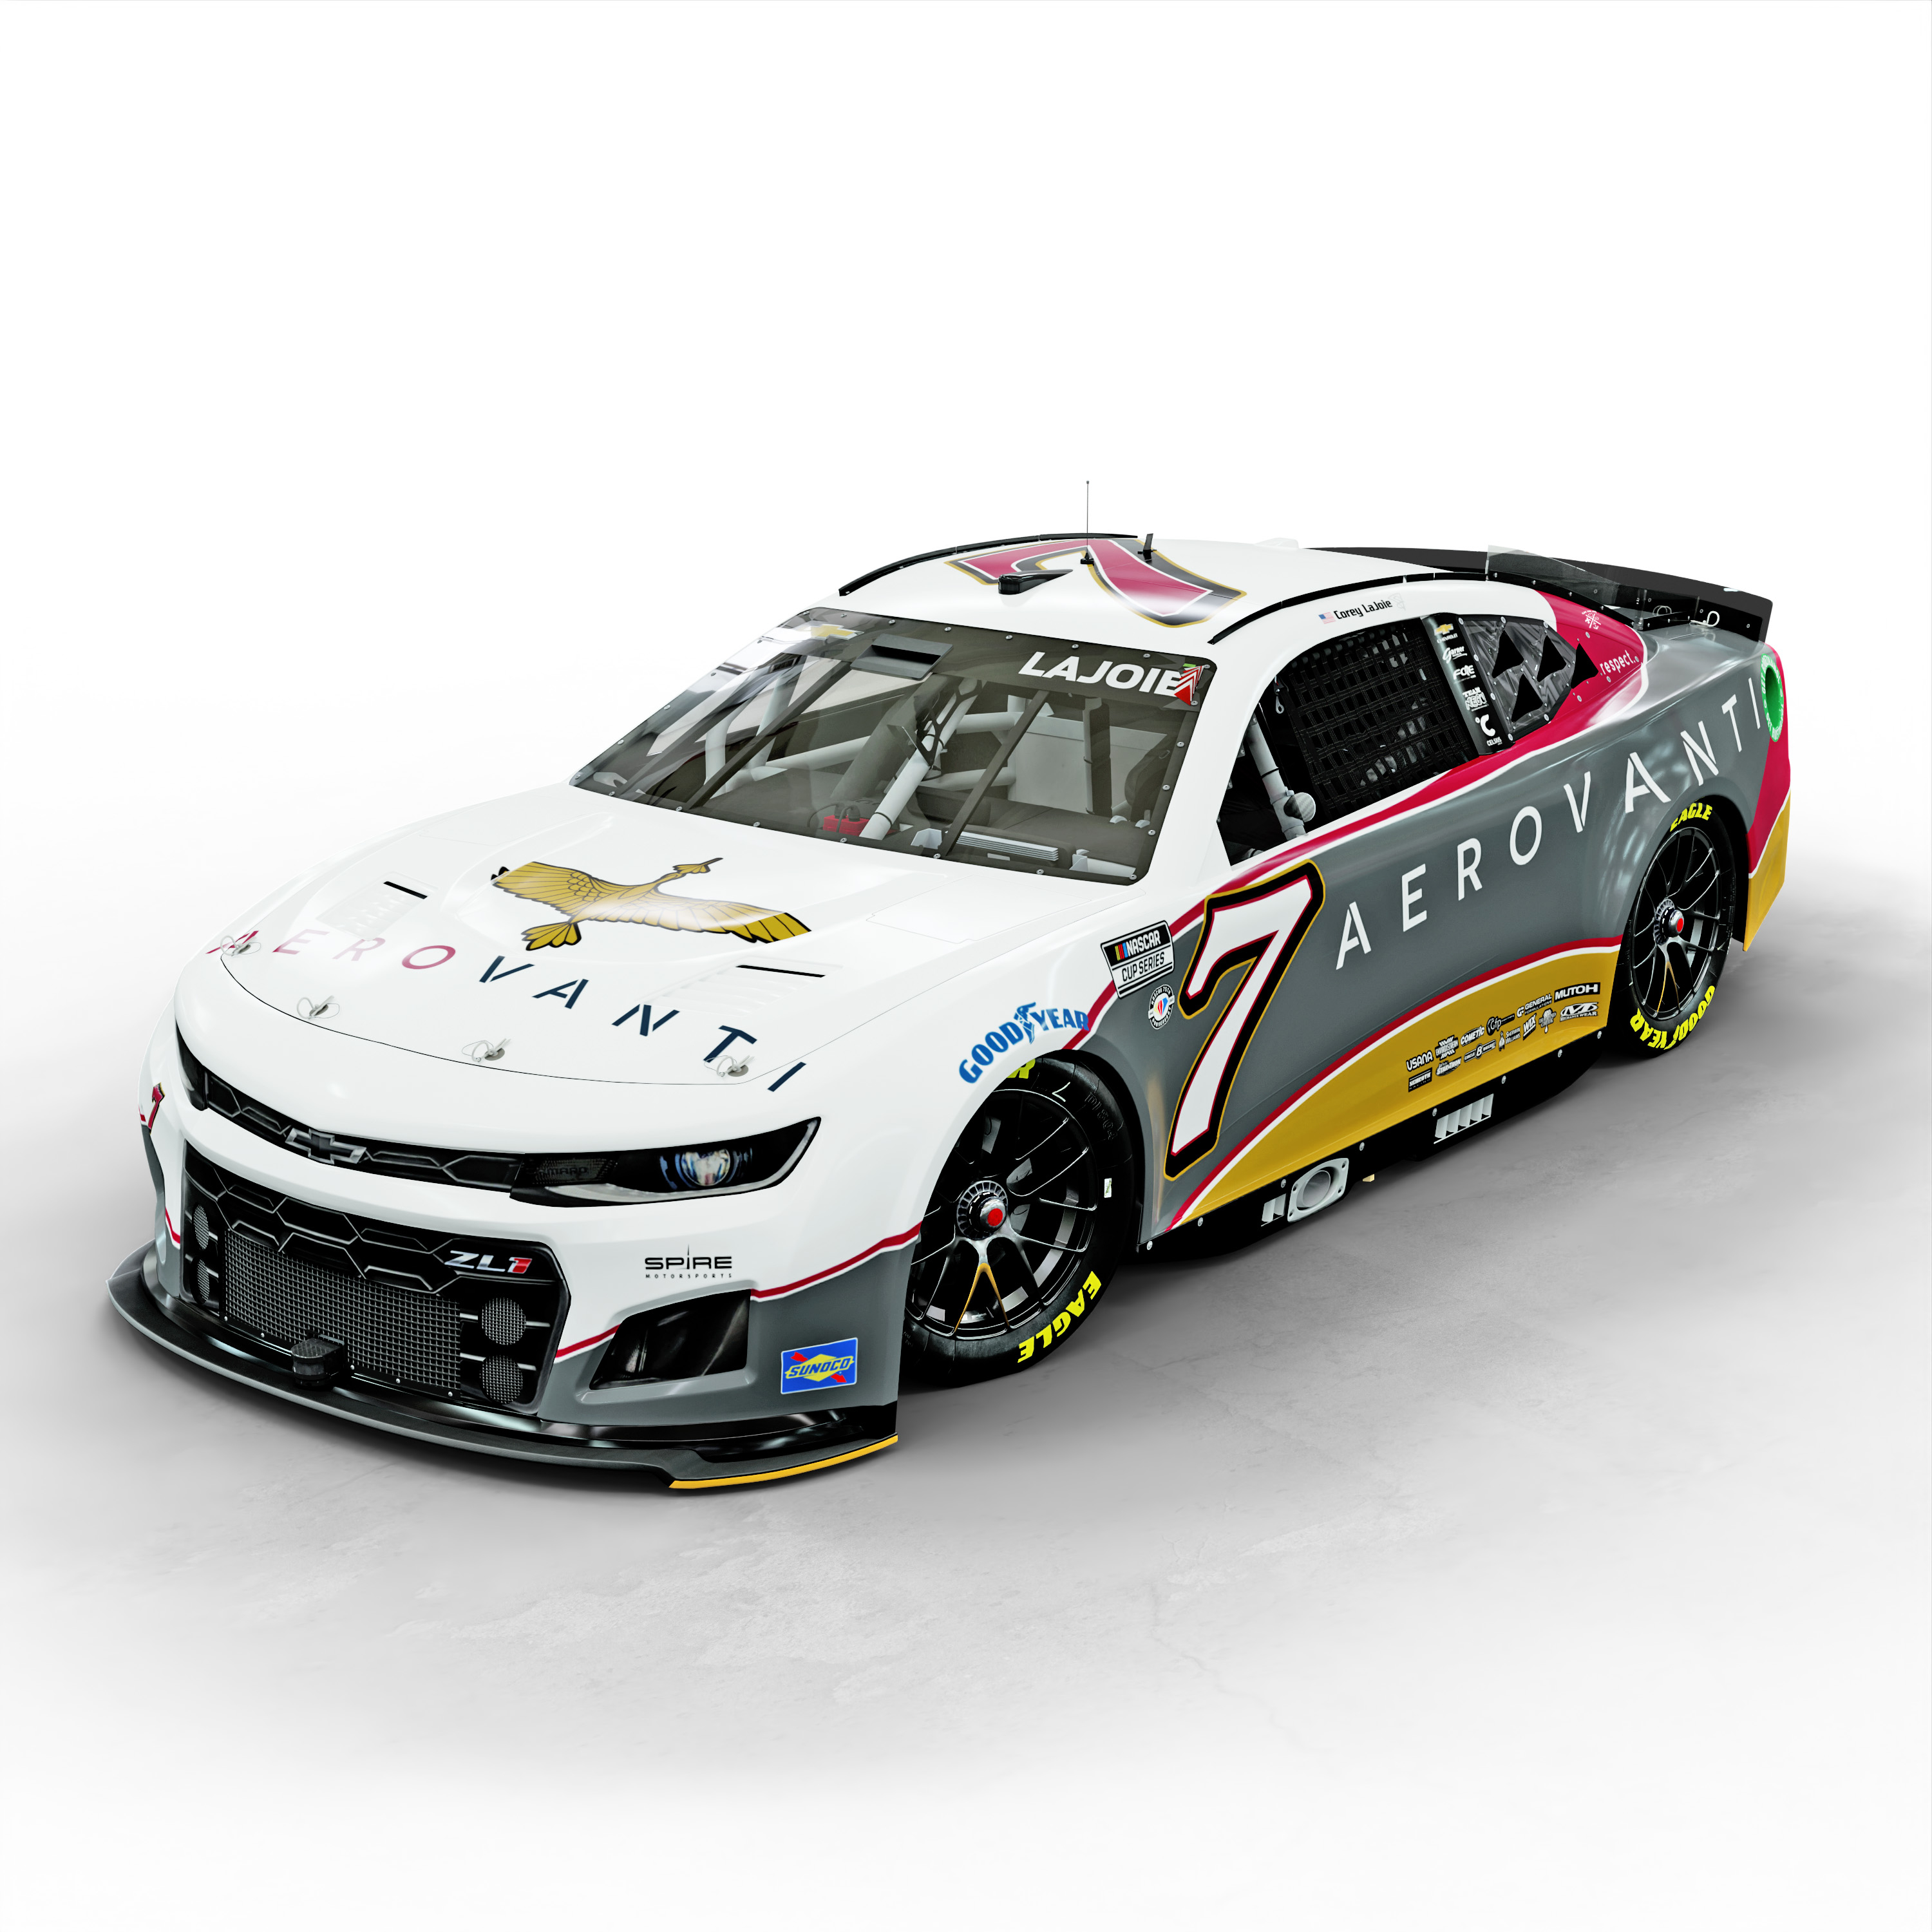 Spire Motorsports, Corey LaJoie Partner with AeroVanti for NASCARs Coca-Cola 600 at Charlotte Motor Speedway Business Wire